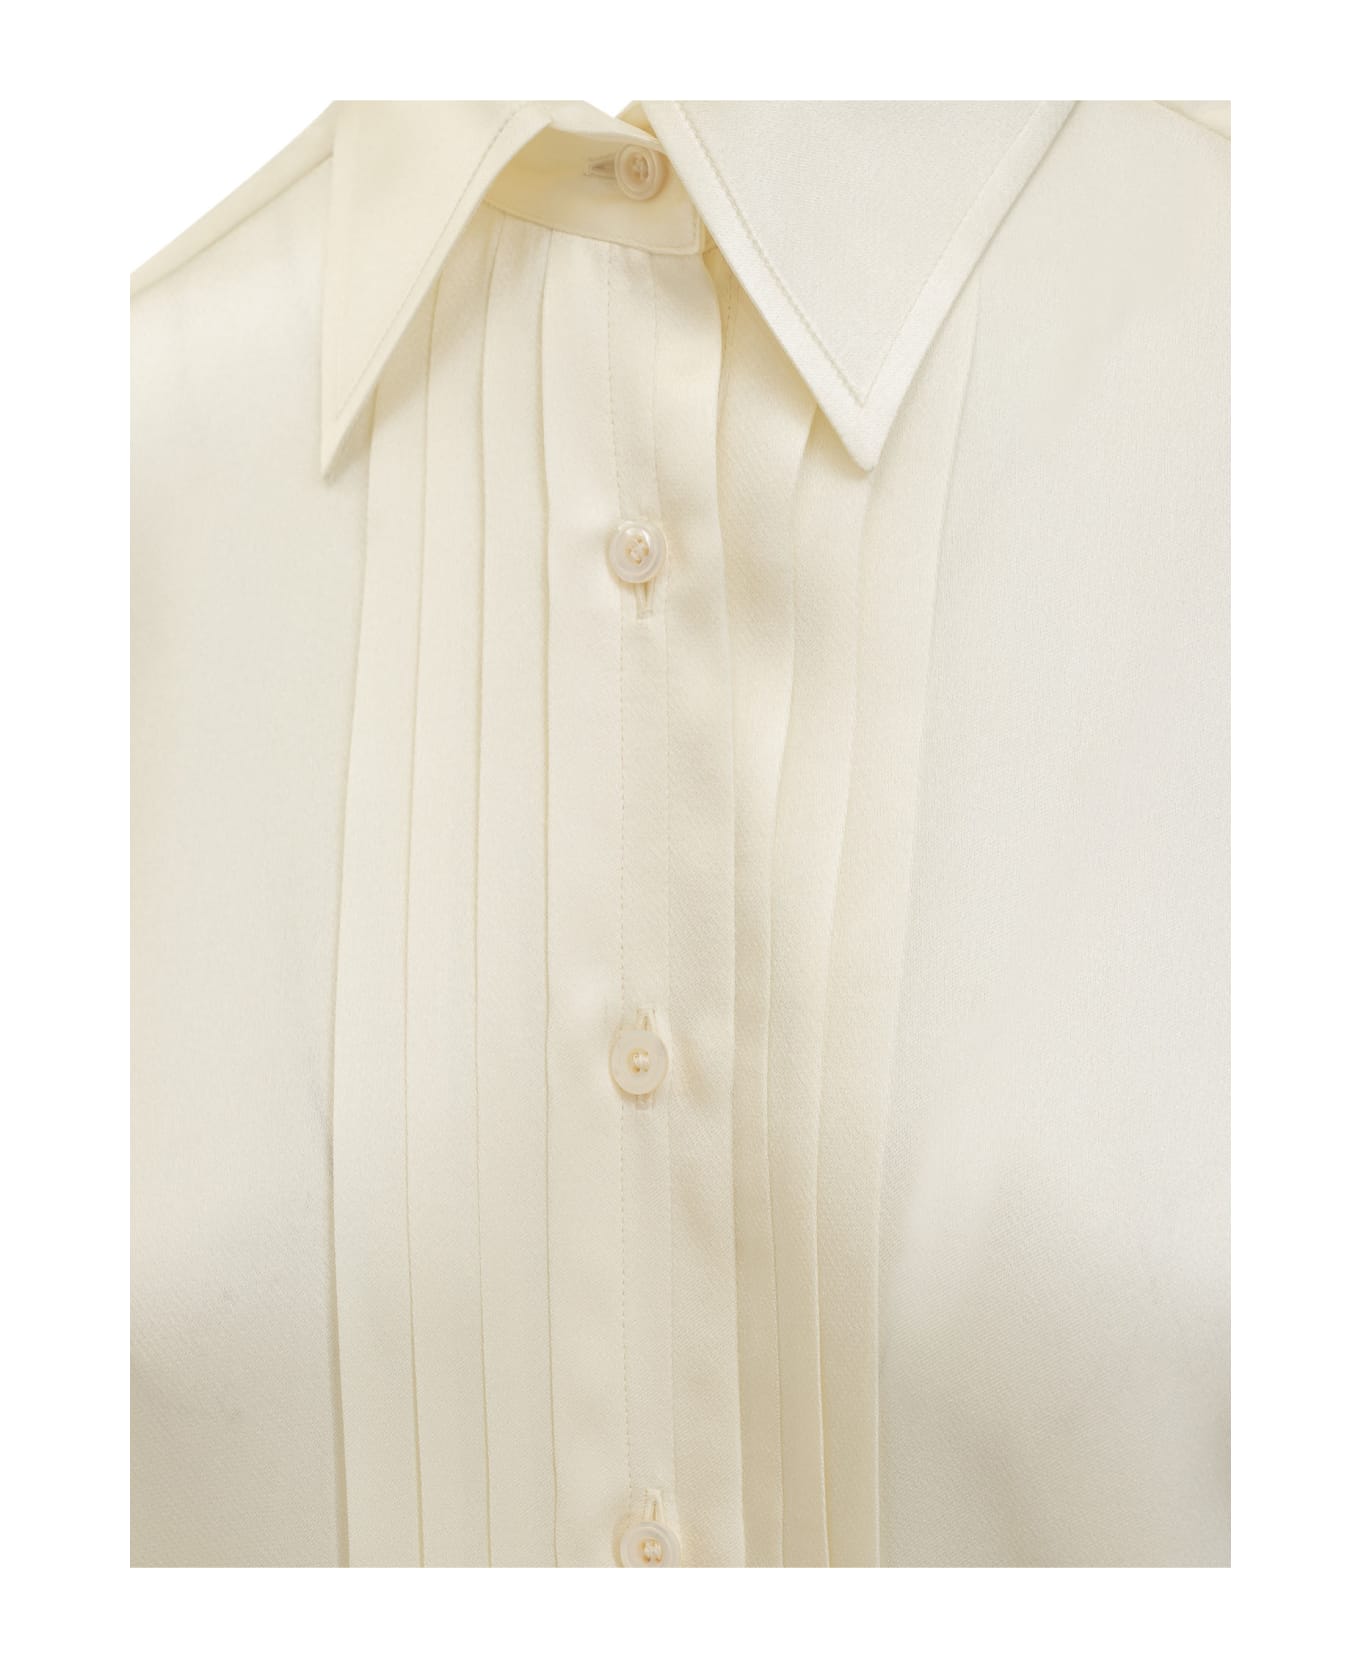 Tom Ford Silk Shirt With Pleated Detail - OFF WHITE シャツ